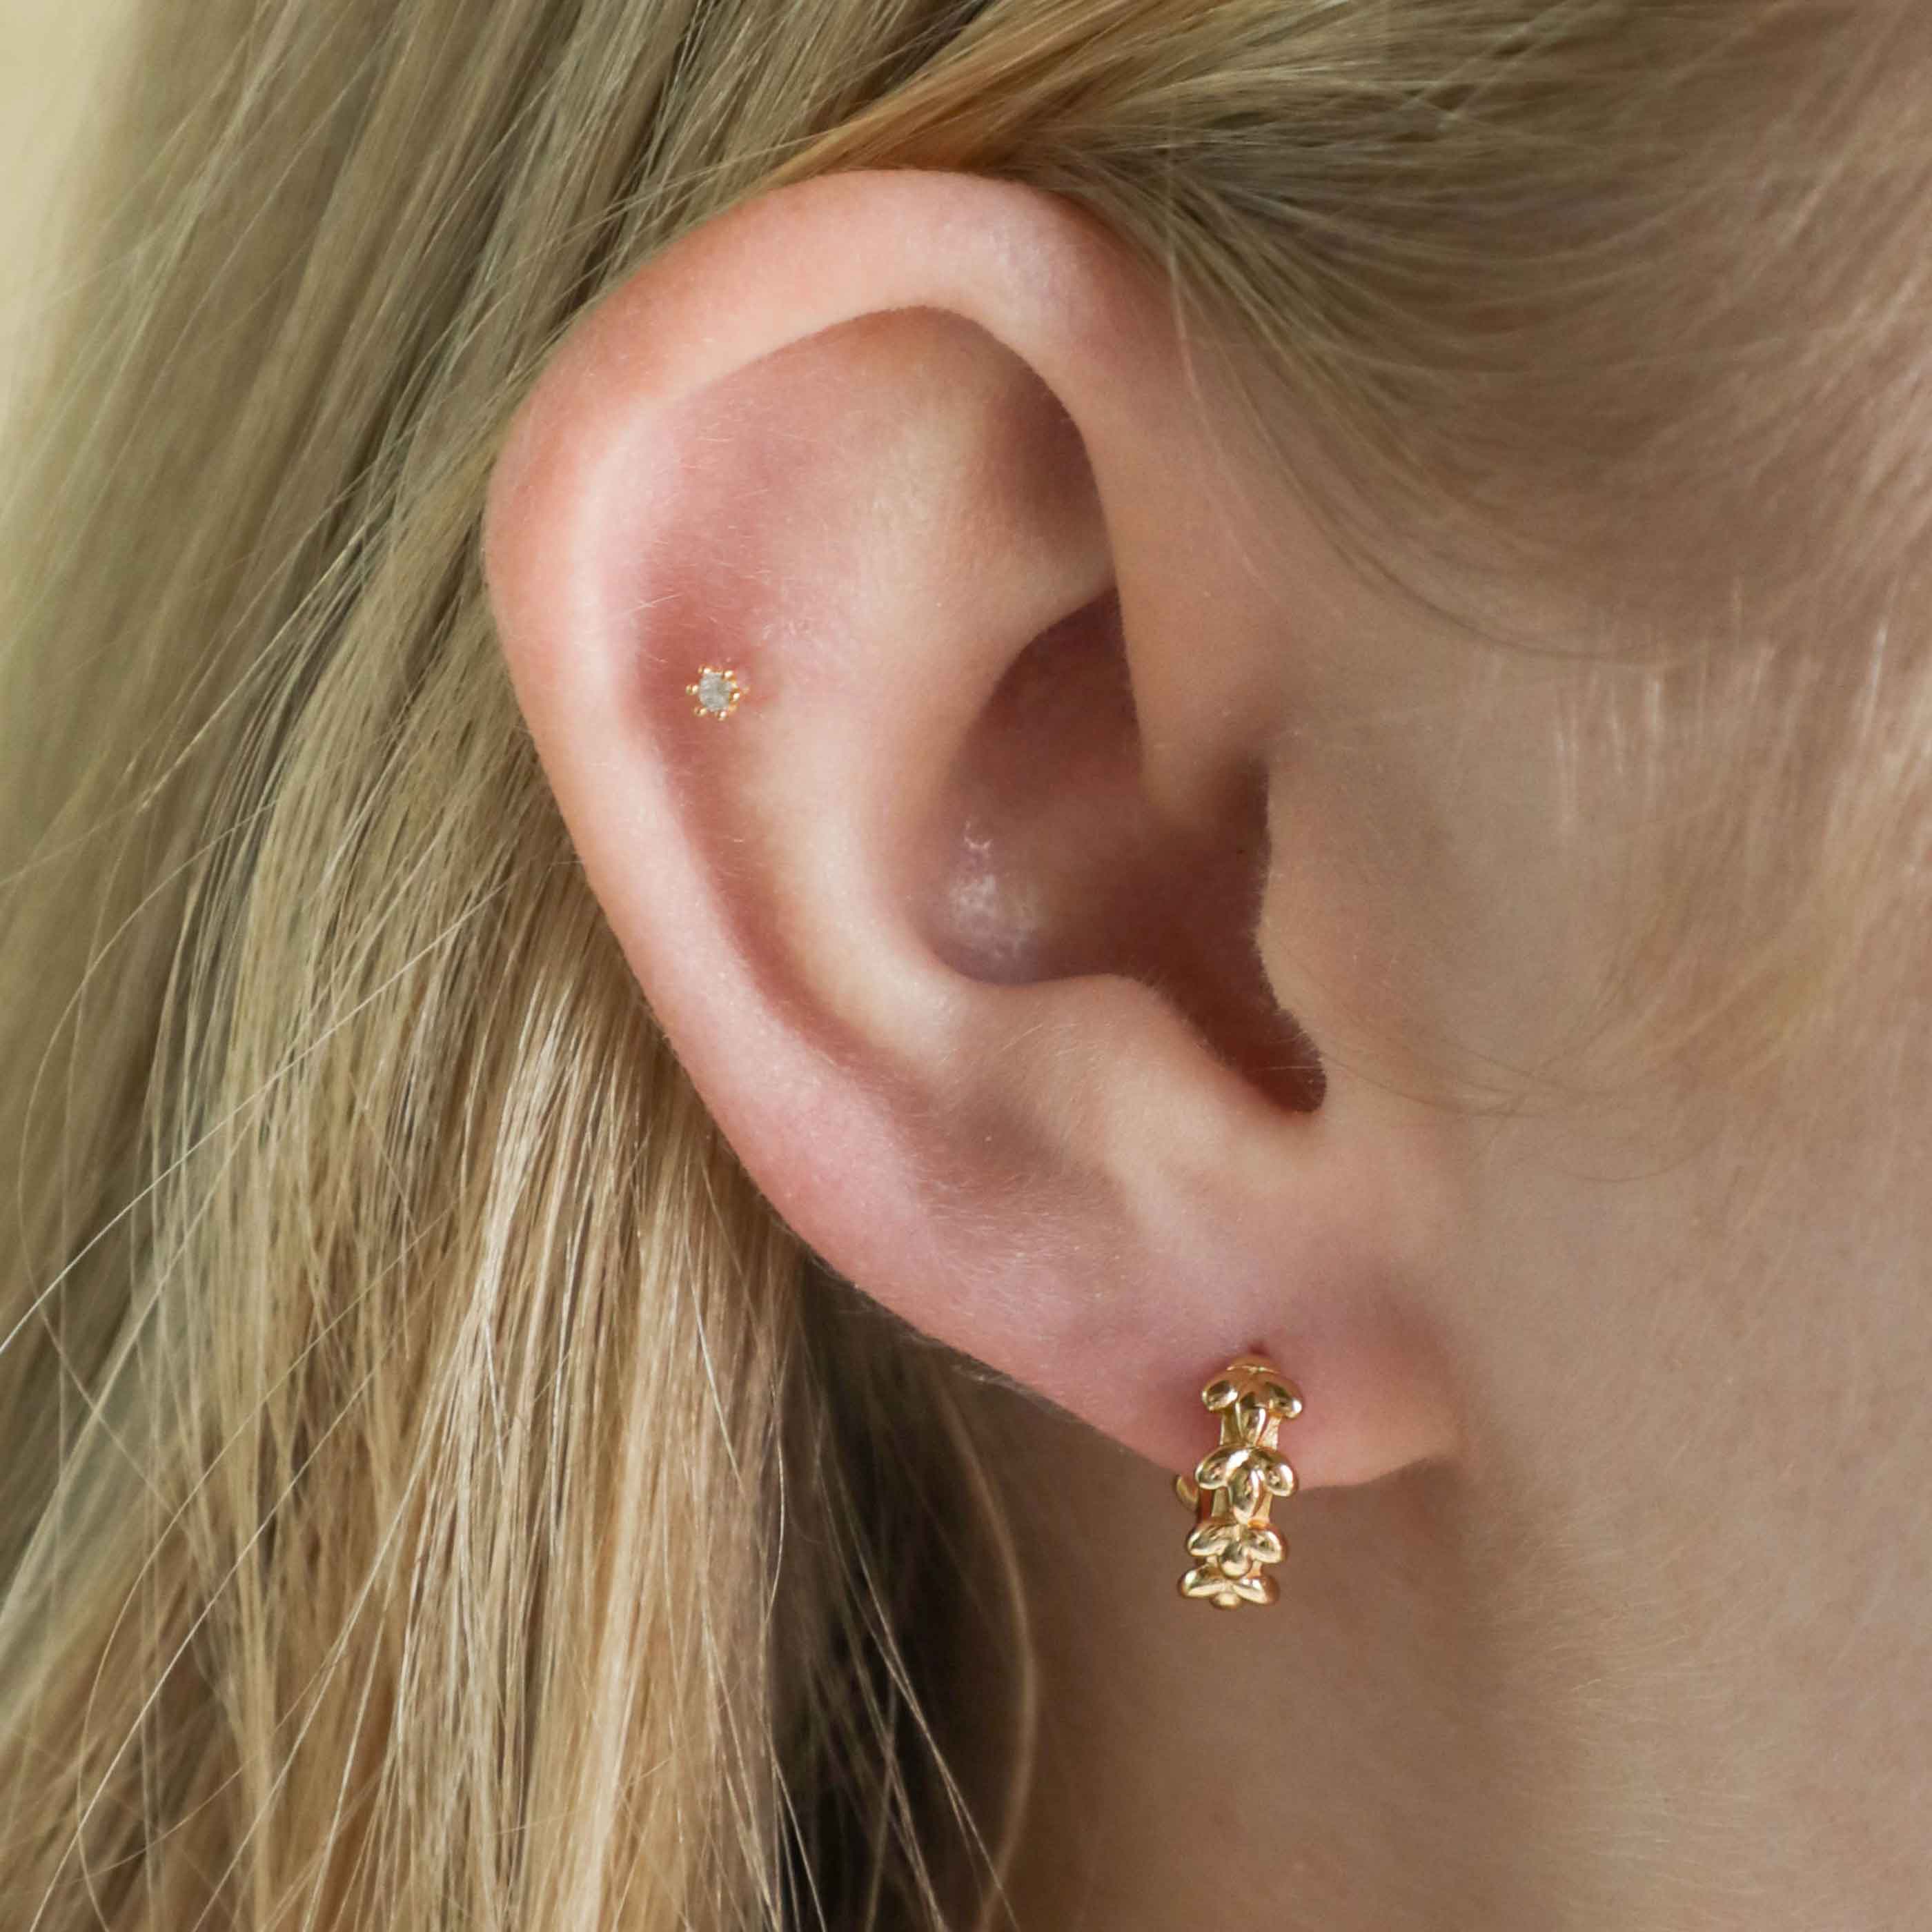 Conch Piercings A Comprehensive Guide to This Trendy Ear Piercing Sty   Pierced